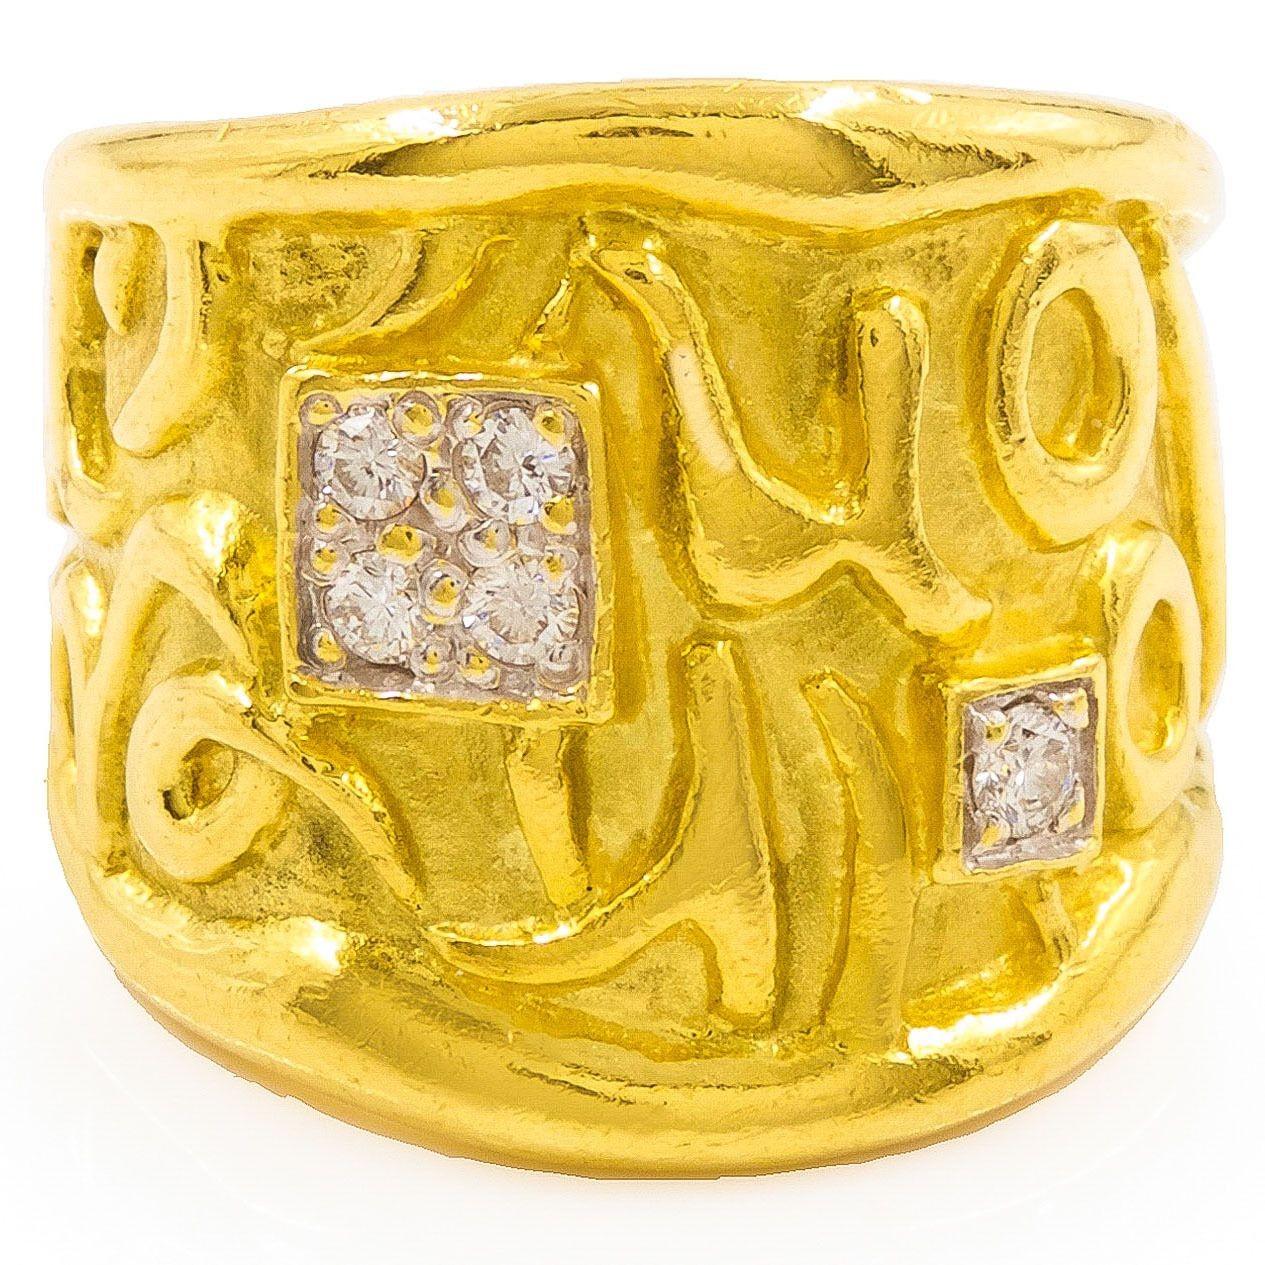 MODERNIST 18K YELLOW GOLD AND DIAMOND RING
With an embossed design set with 5 brilliant-cut round diamonds  Size 6/6.25
Item # 204KPI14L 

A very fun modernist ring with a bold embossed script surrounding two raised squares that frame a single